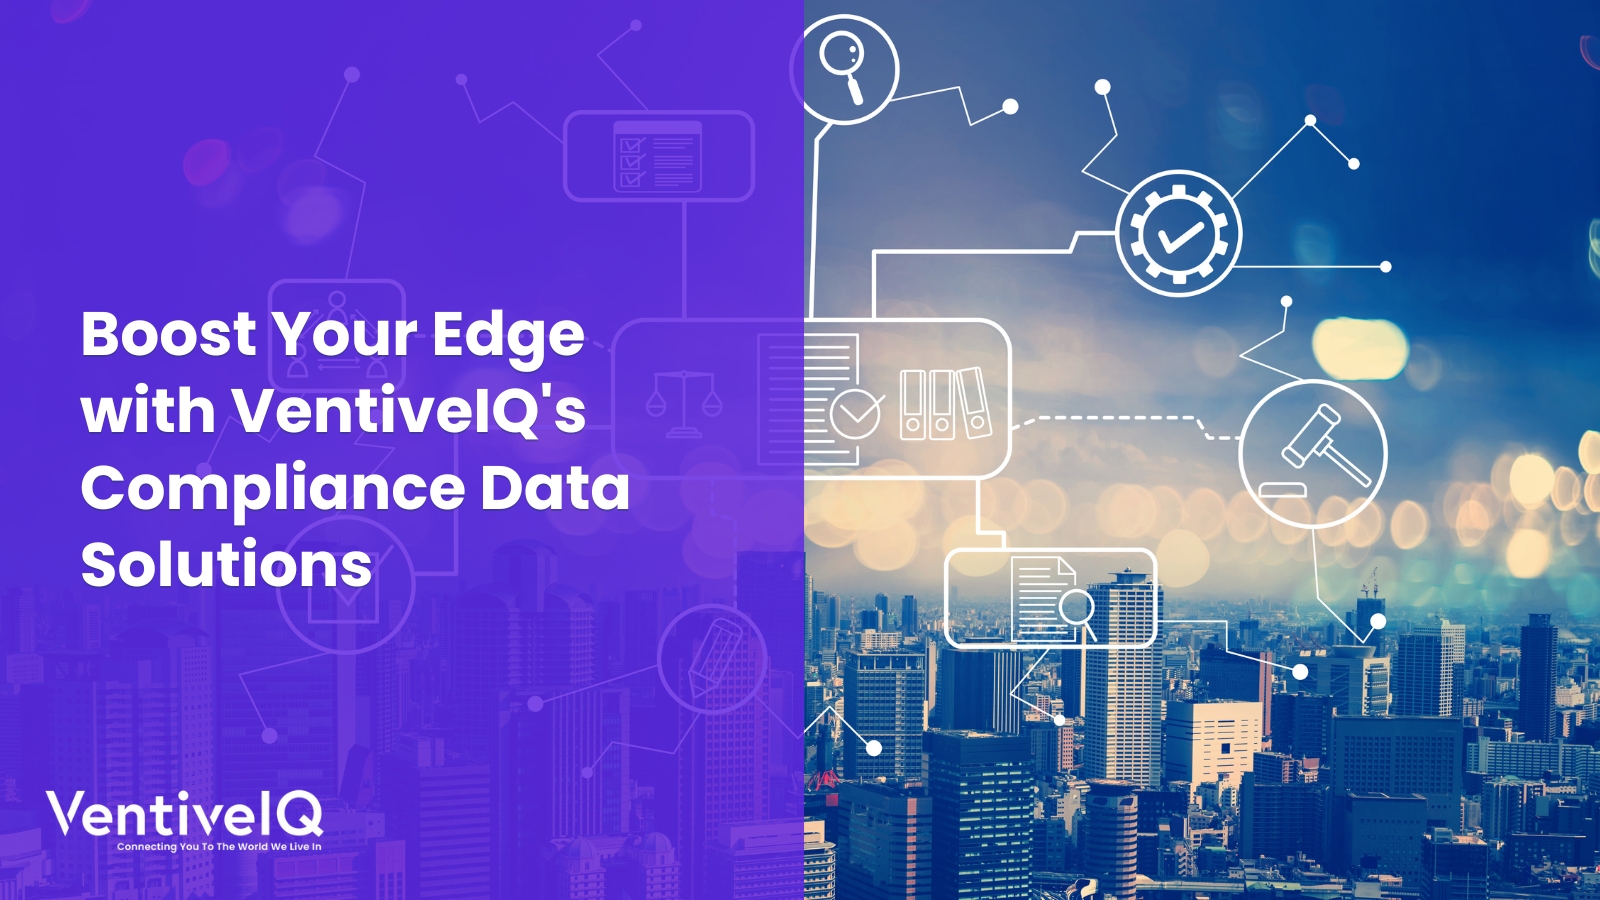 Compliance Data Solutions by VentiveIQ to Boost Your Edge